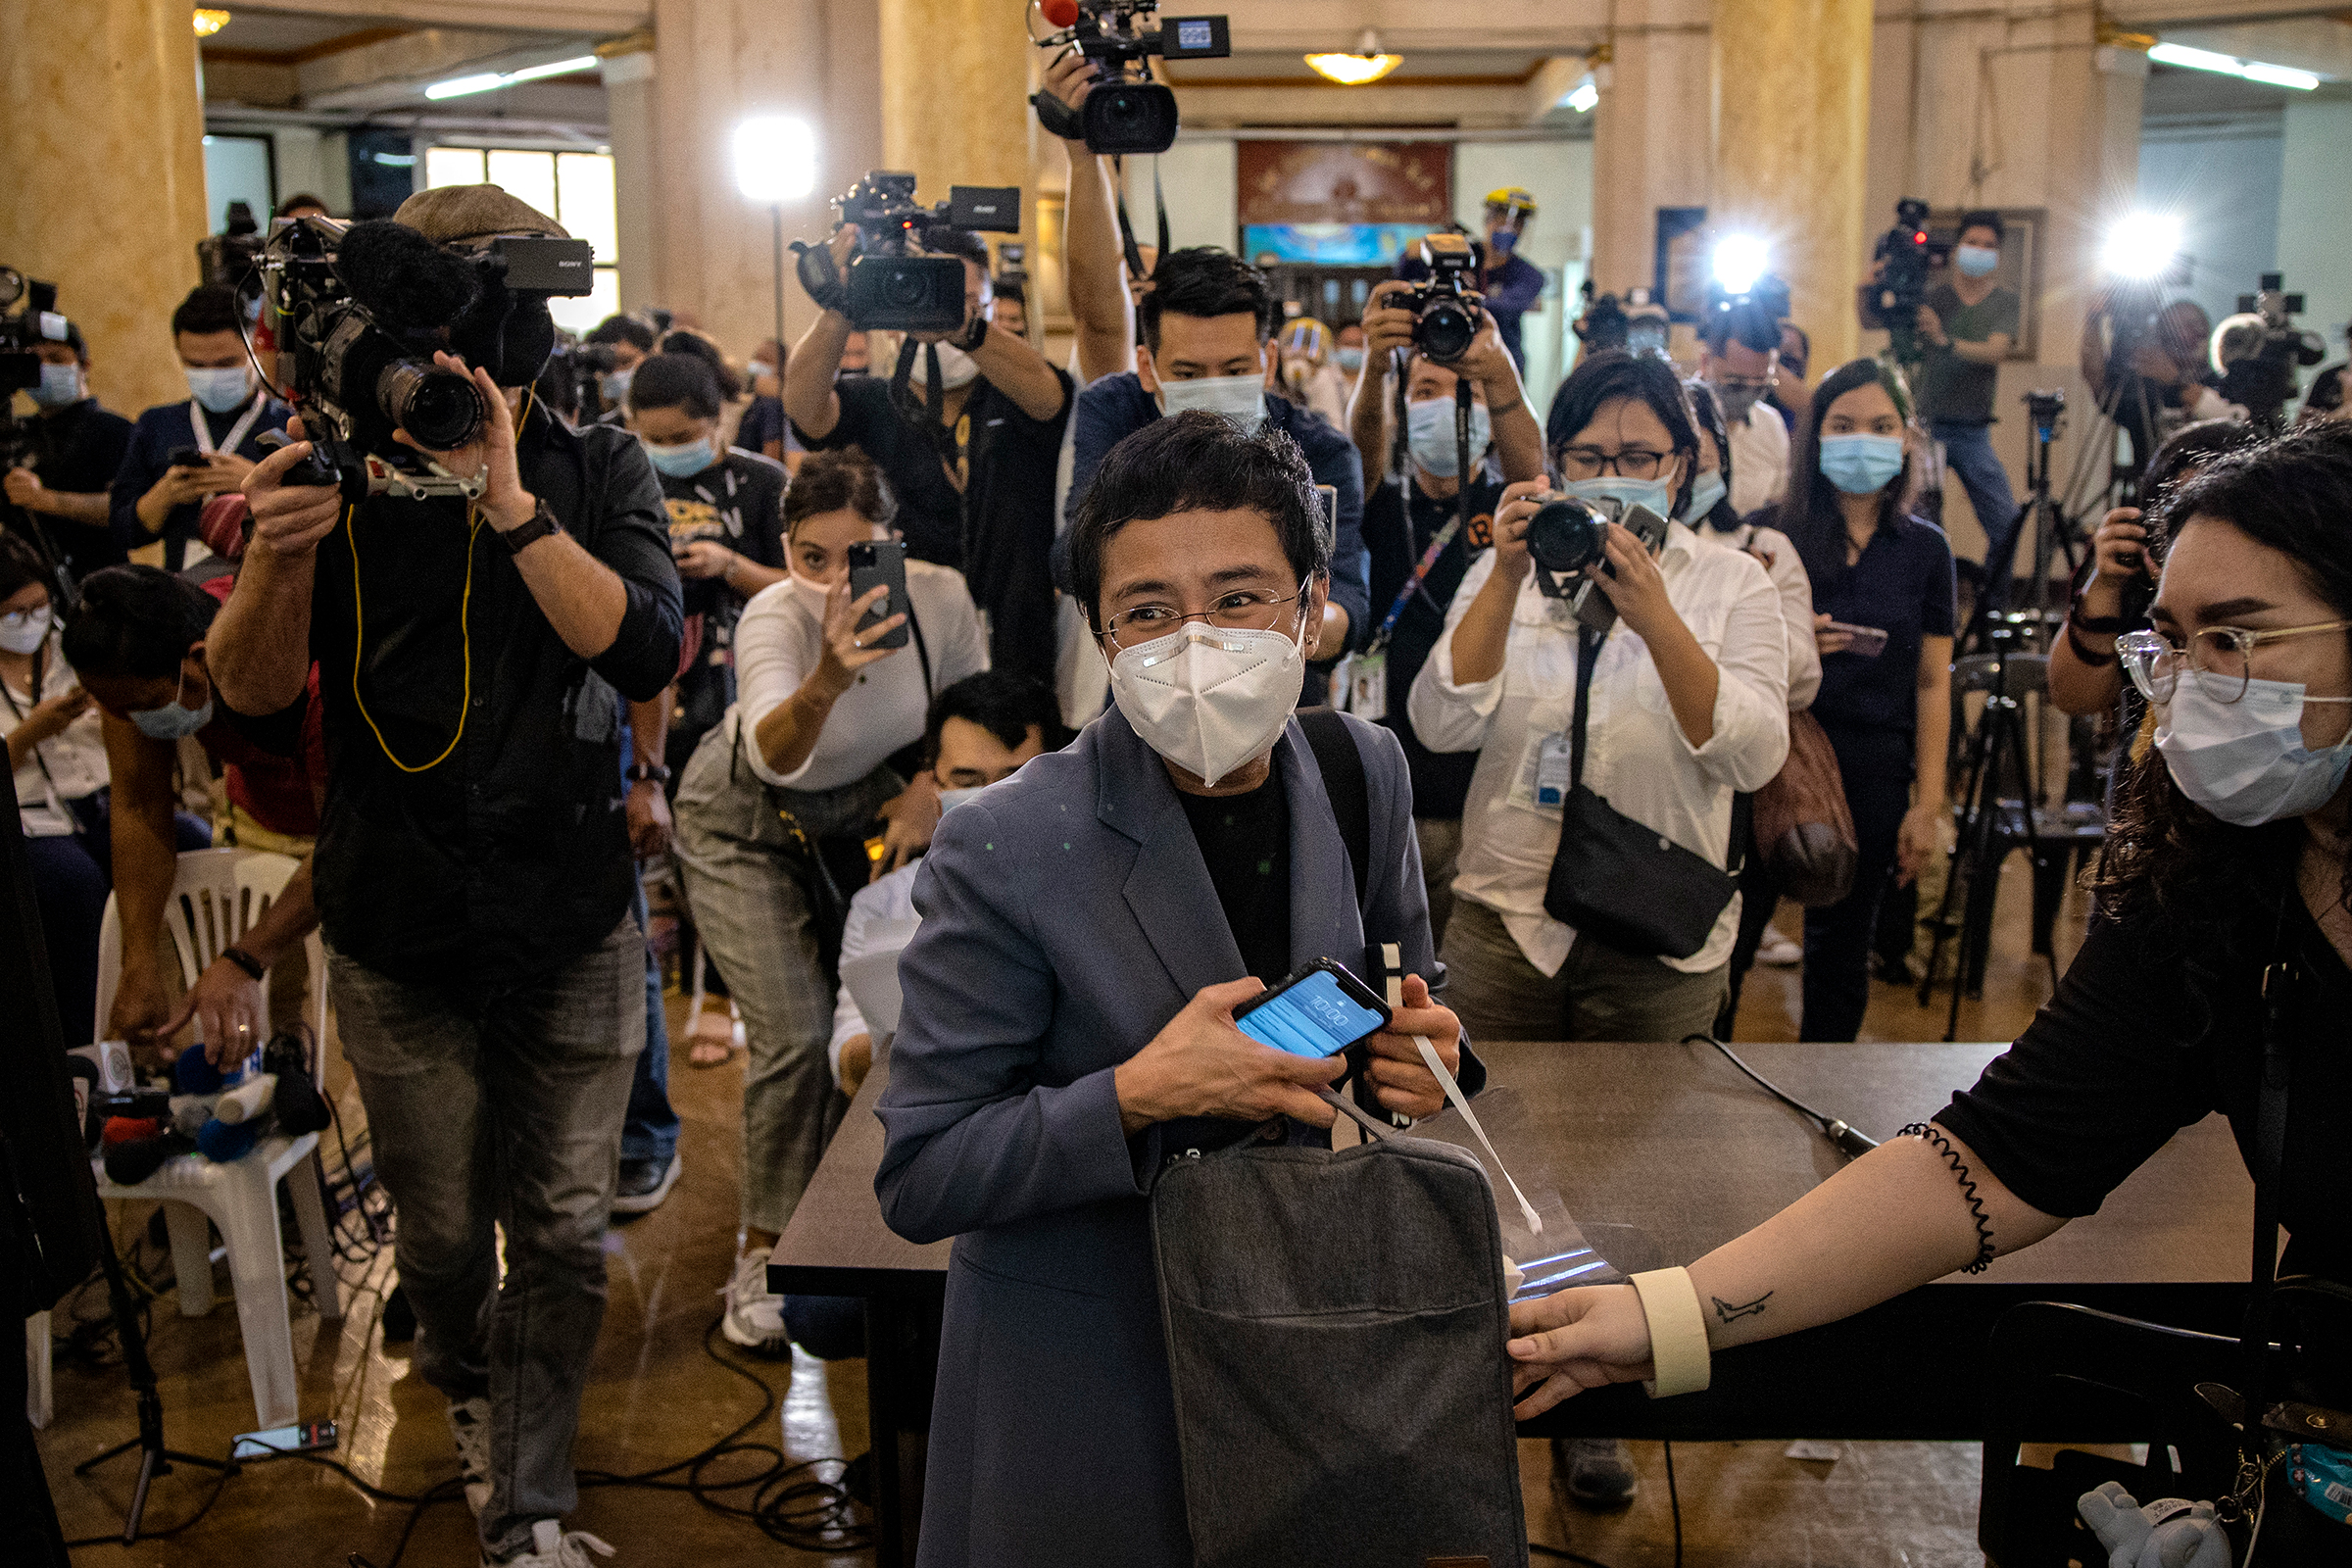 Maria Ressa, editor and CEO of Rappler, leaves a regional trial court after being convicted for cyber libel, in Manila on June 15, 2020. Ressa and Dmitry Muratov of Russia were awarded the 2021 Nobel Peace Prize on Oct. 8. (Ezra Acayan—Getty Images)